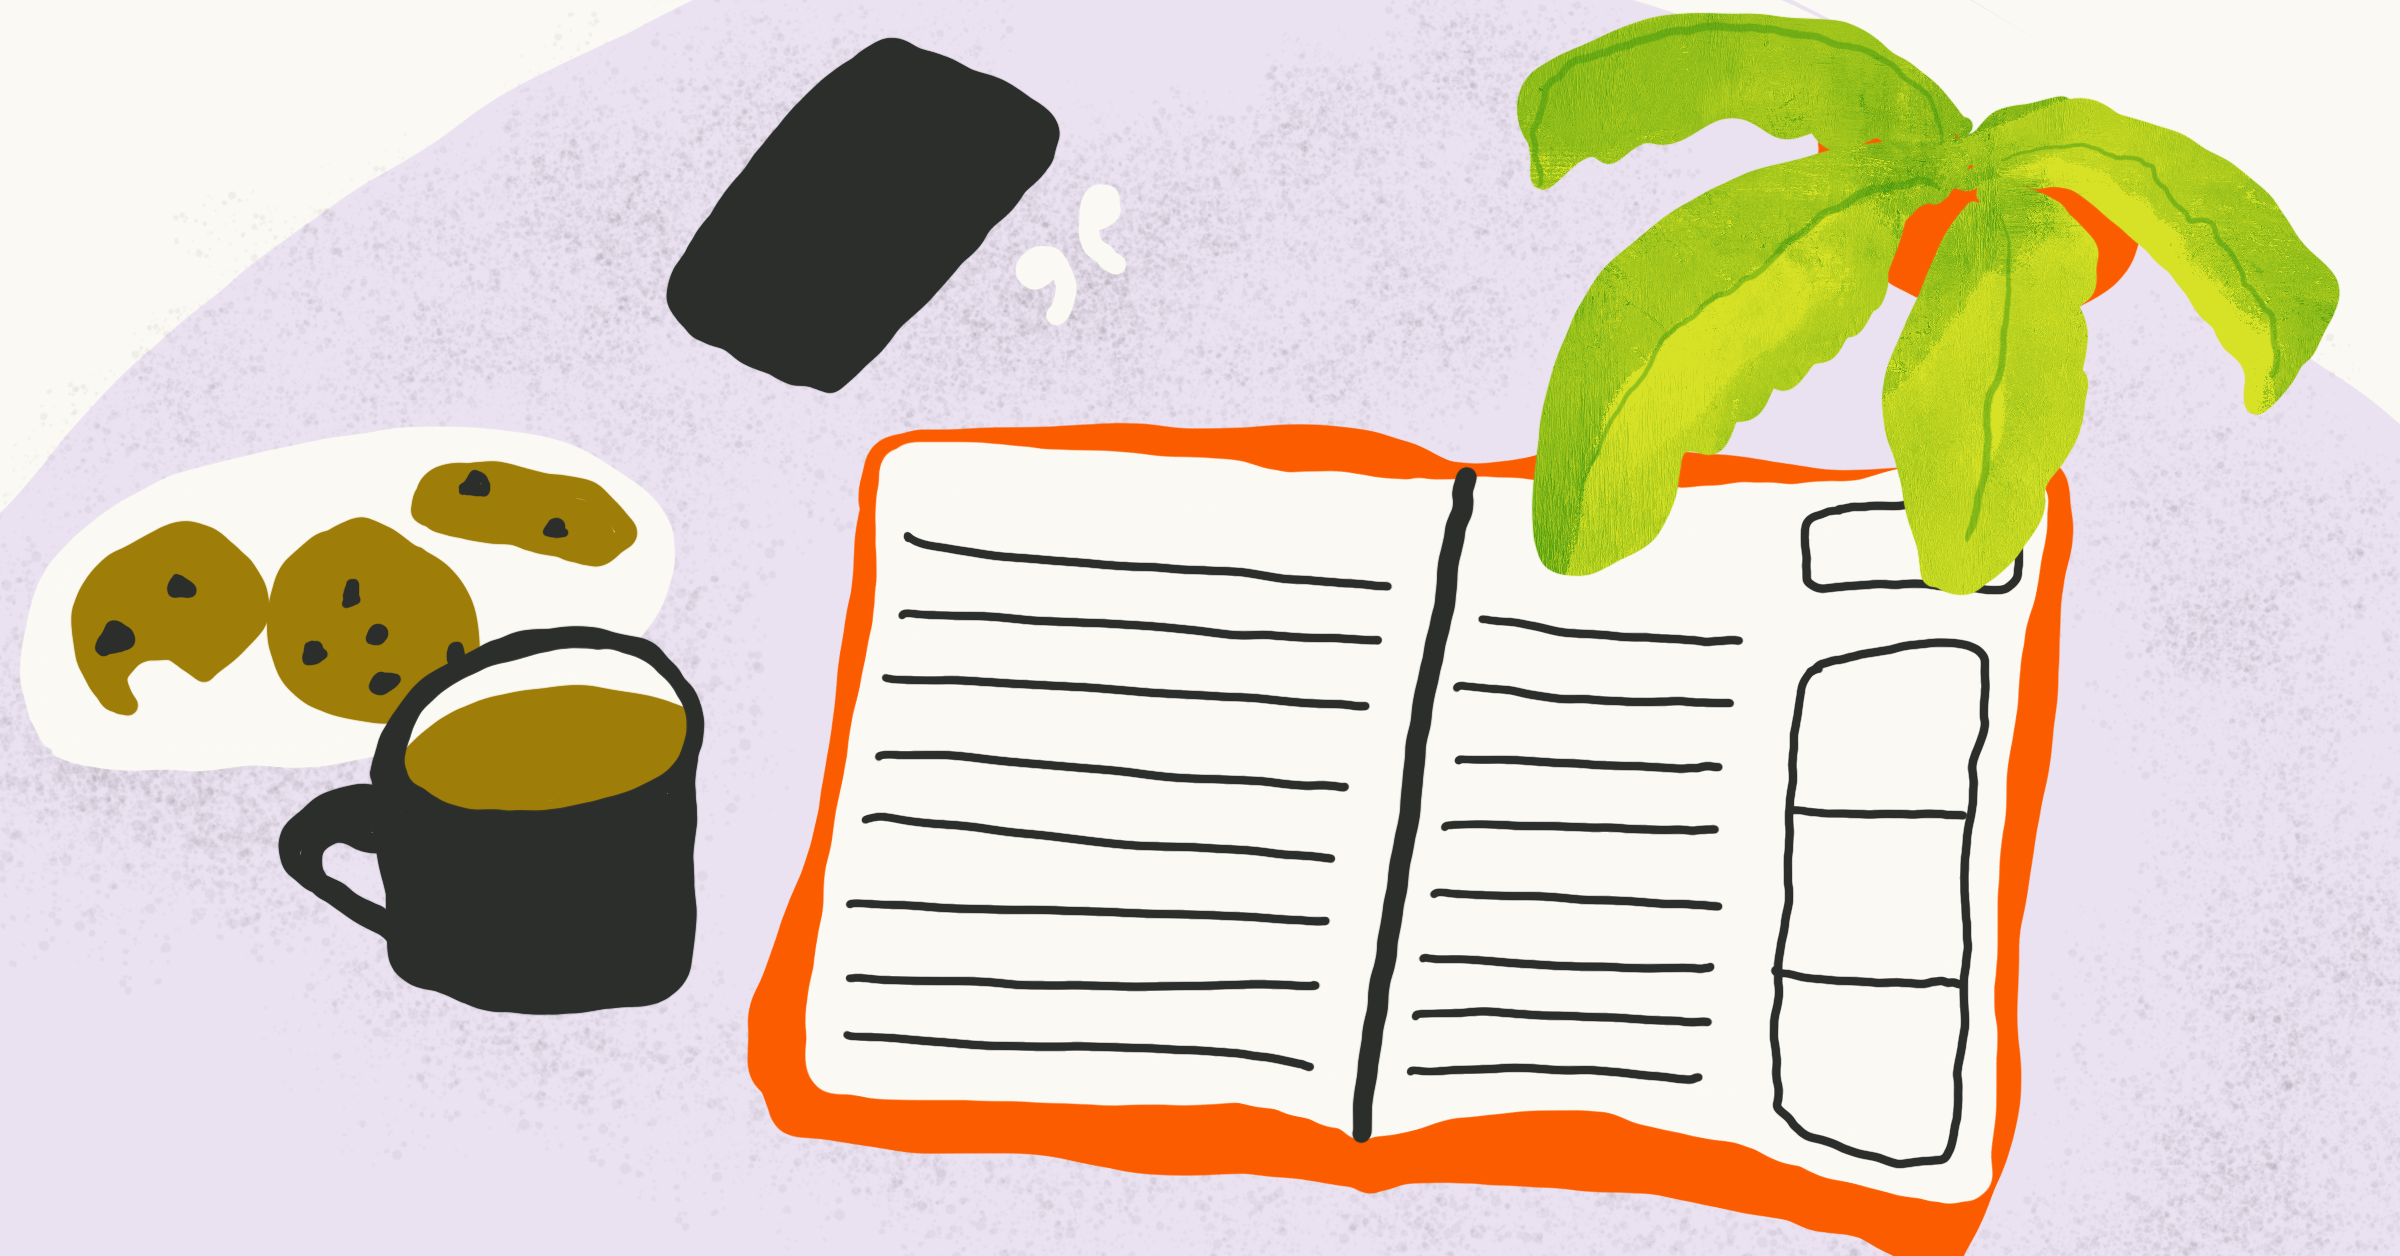 Illustration of a tabletop with cookies, coffee, a plant and an open planner